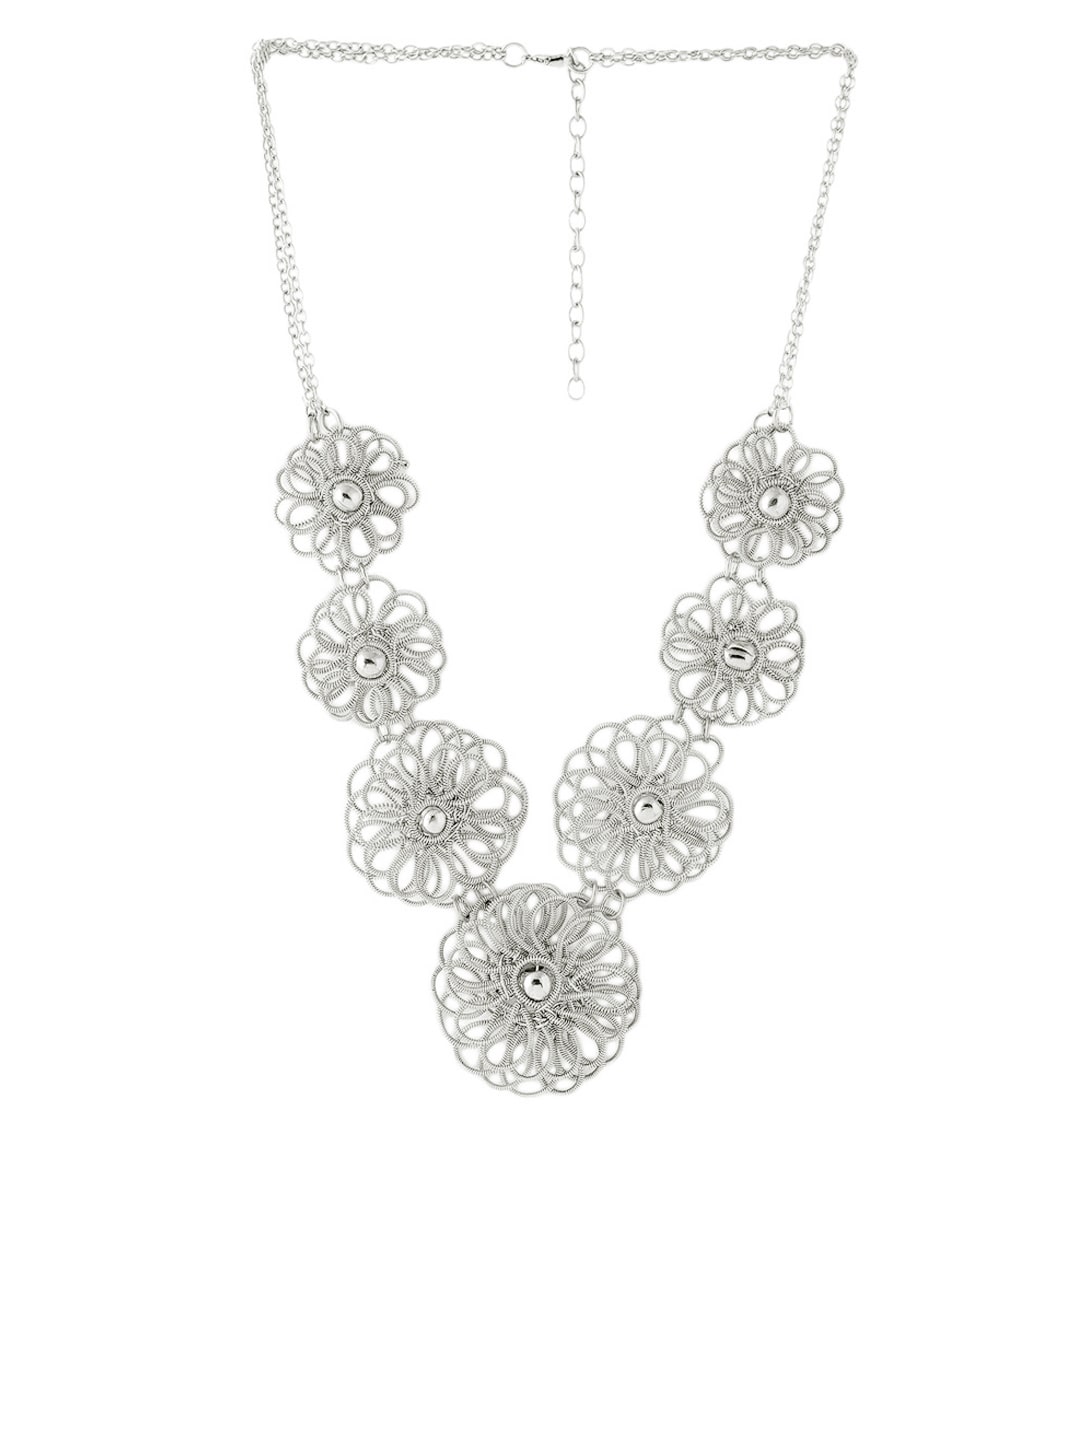 Pitaraa Silver Coil Flower Necklace